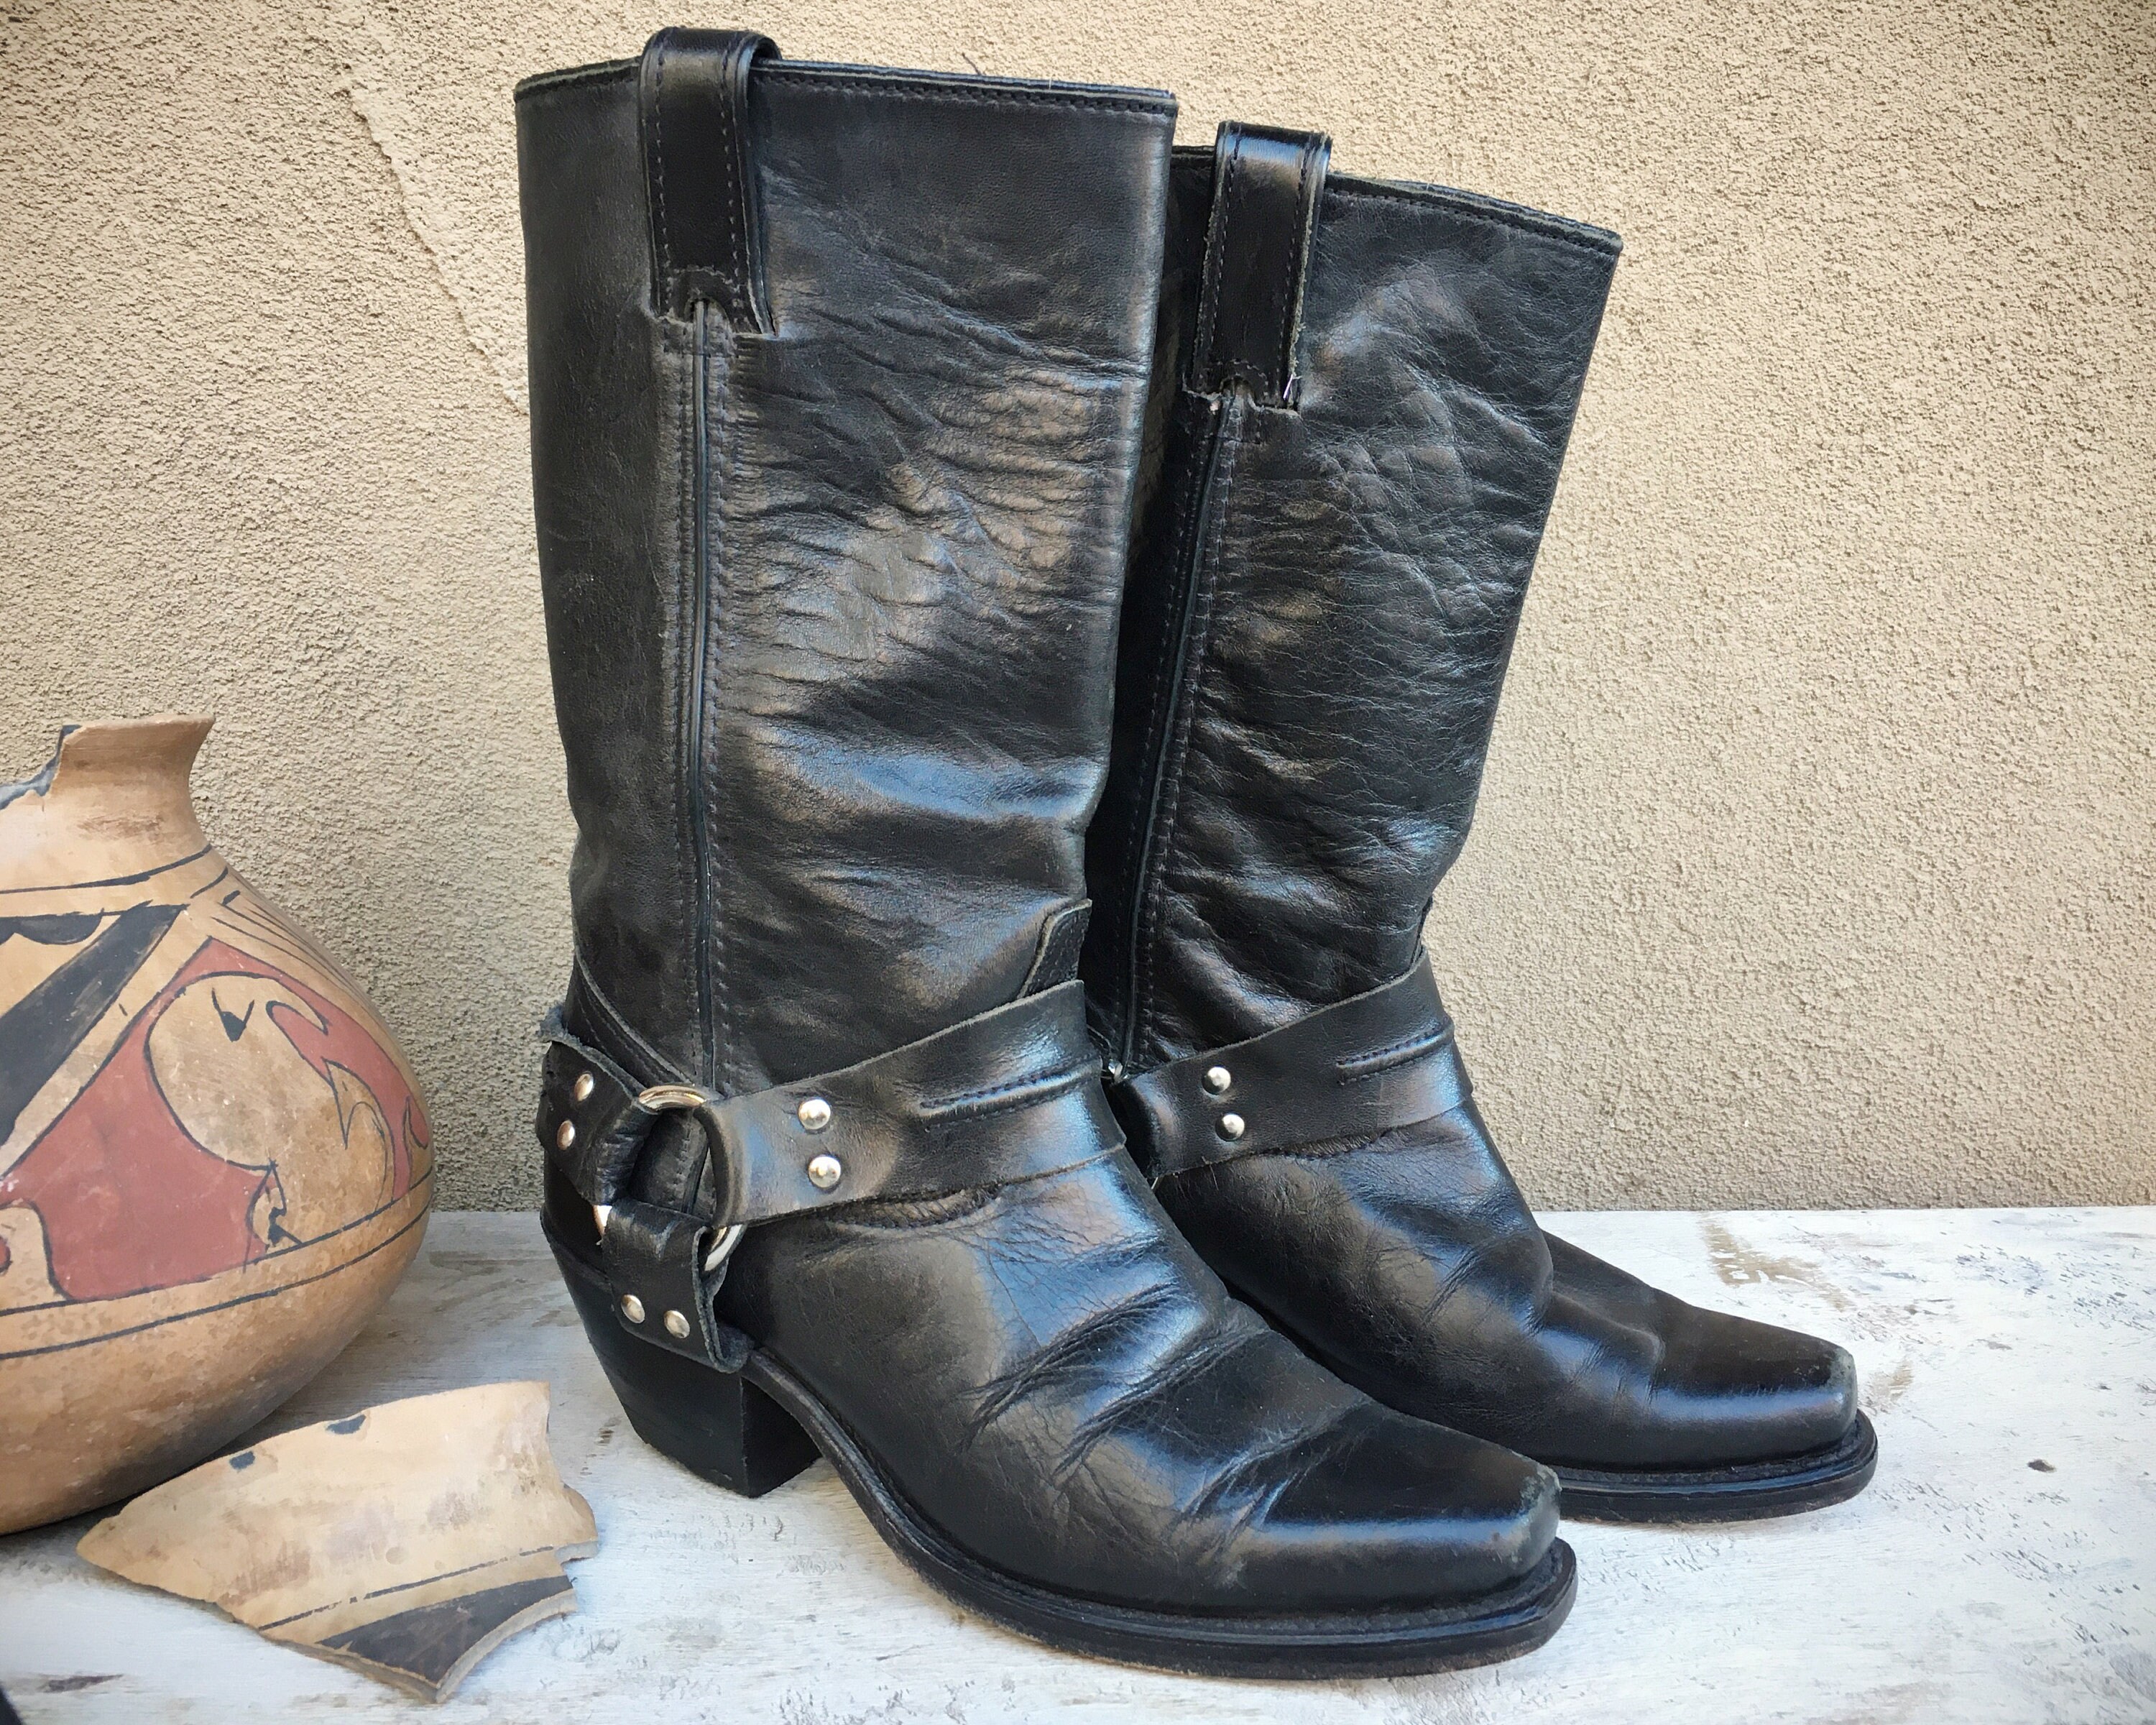 1970s Black Leather Motorcycle Boots Women's Size 6.5 (Run Small) Made ...